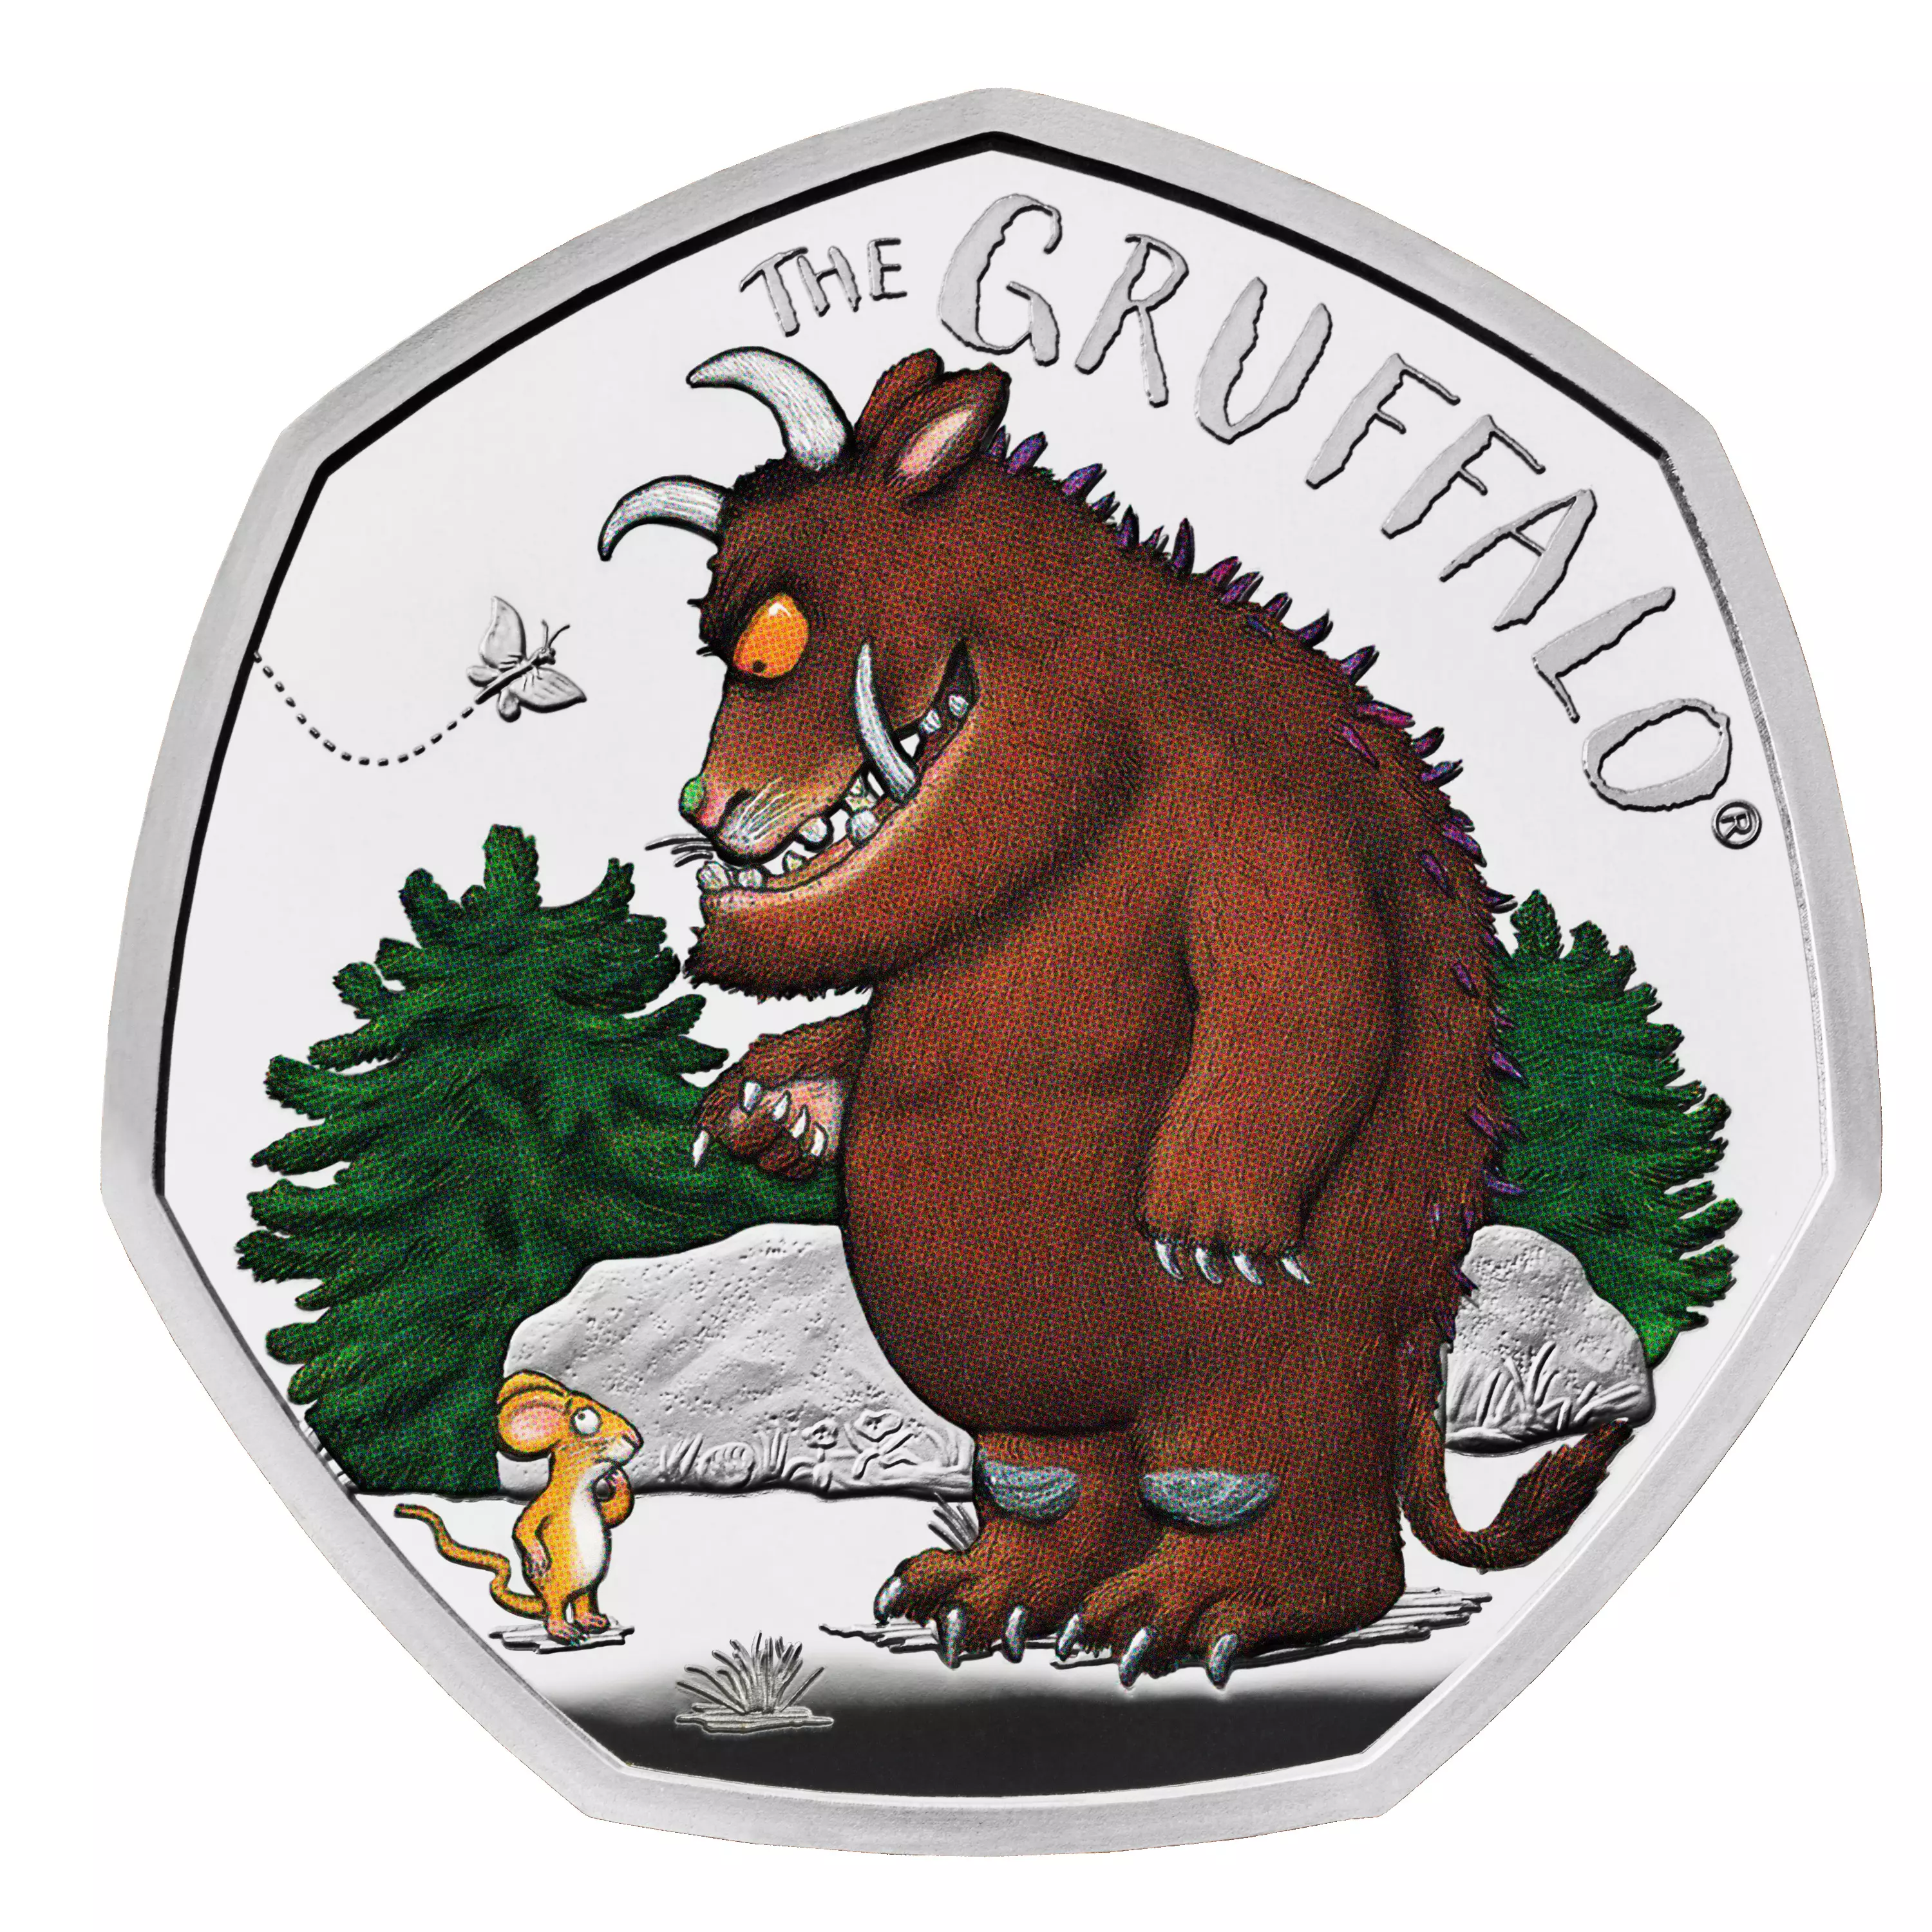 The Gruffalo is pictured meeting Mouse in the woods on the 50p coin